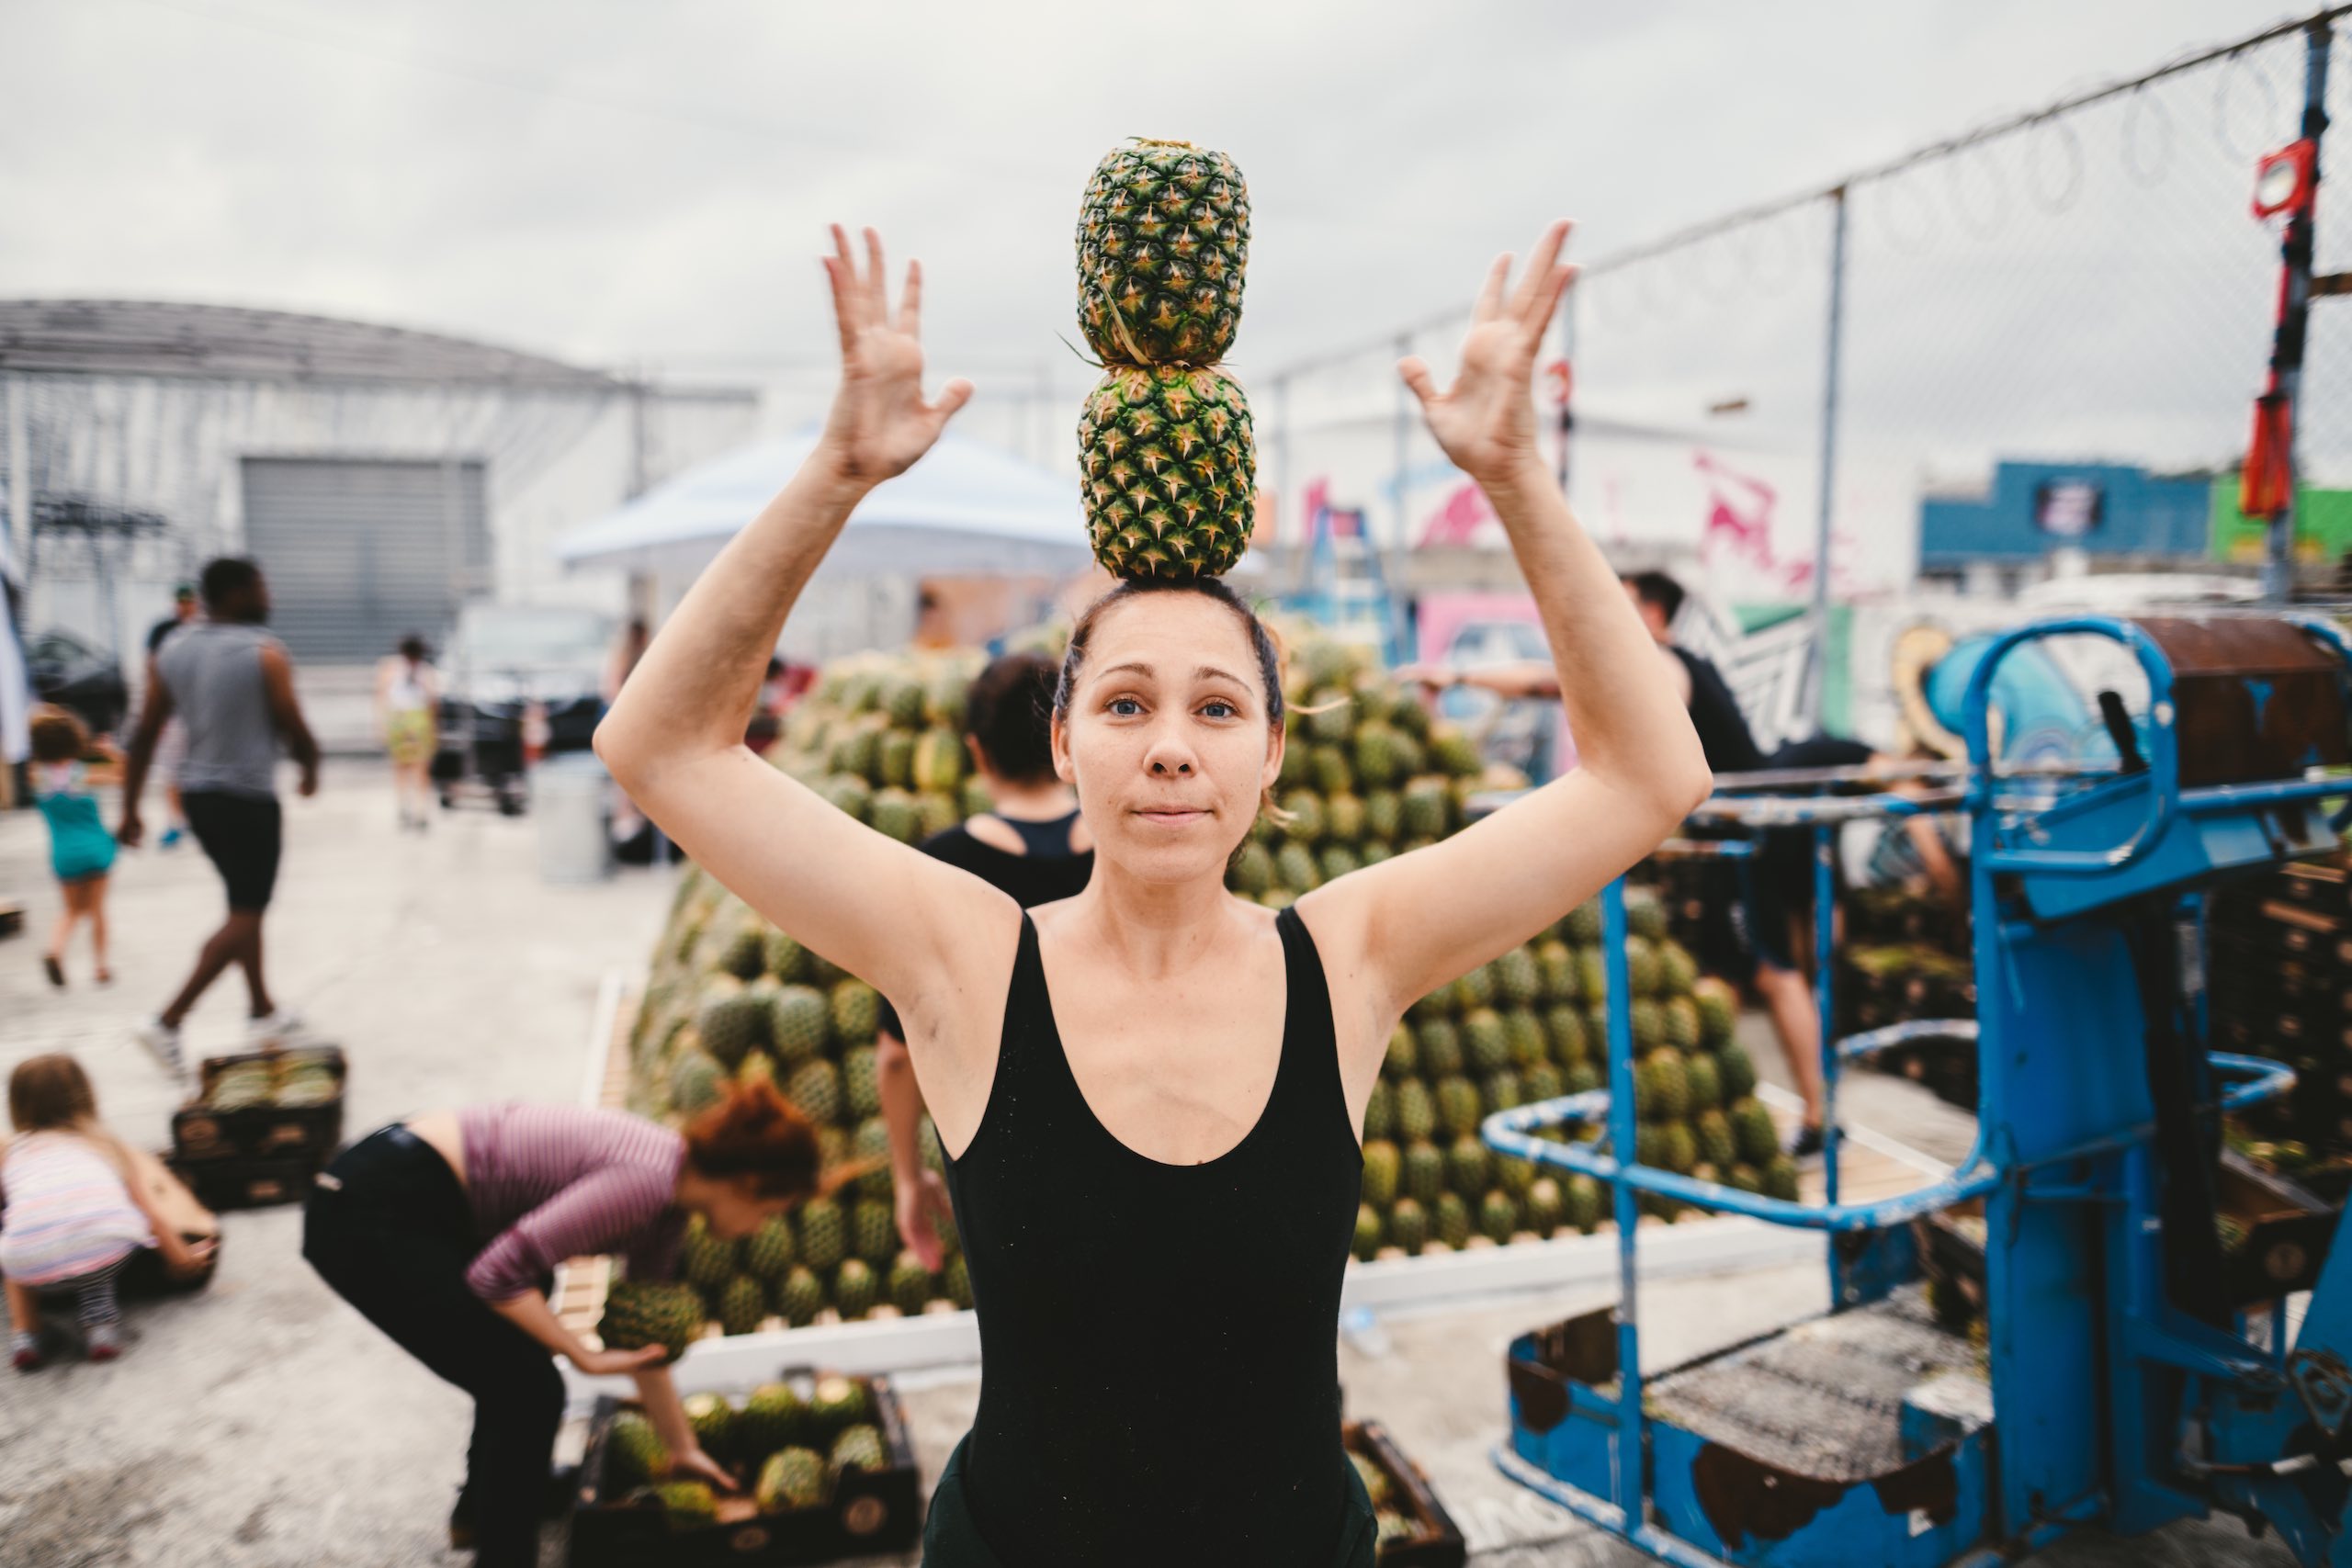 Artwalk 2018 May Pineapple Pyramid Woman wearing black tank top balancing two pineapples on her head with pineapple pyramid in the background